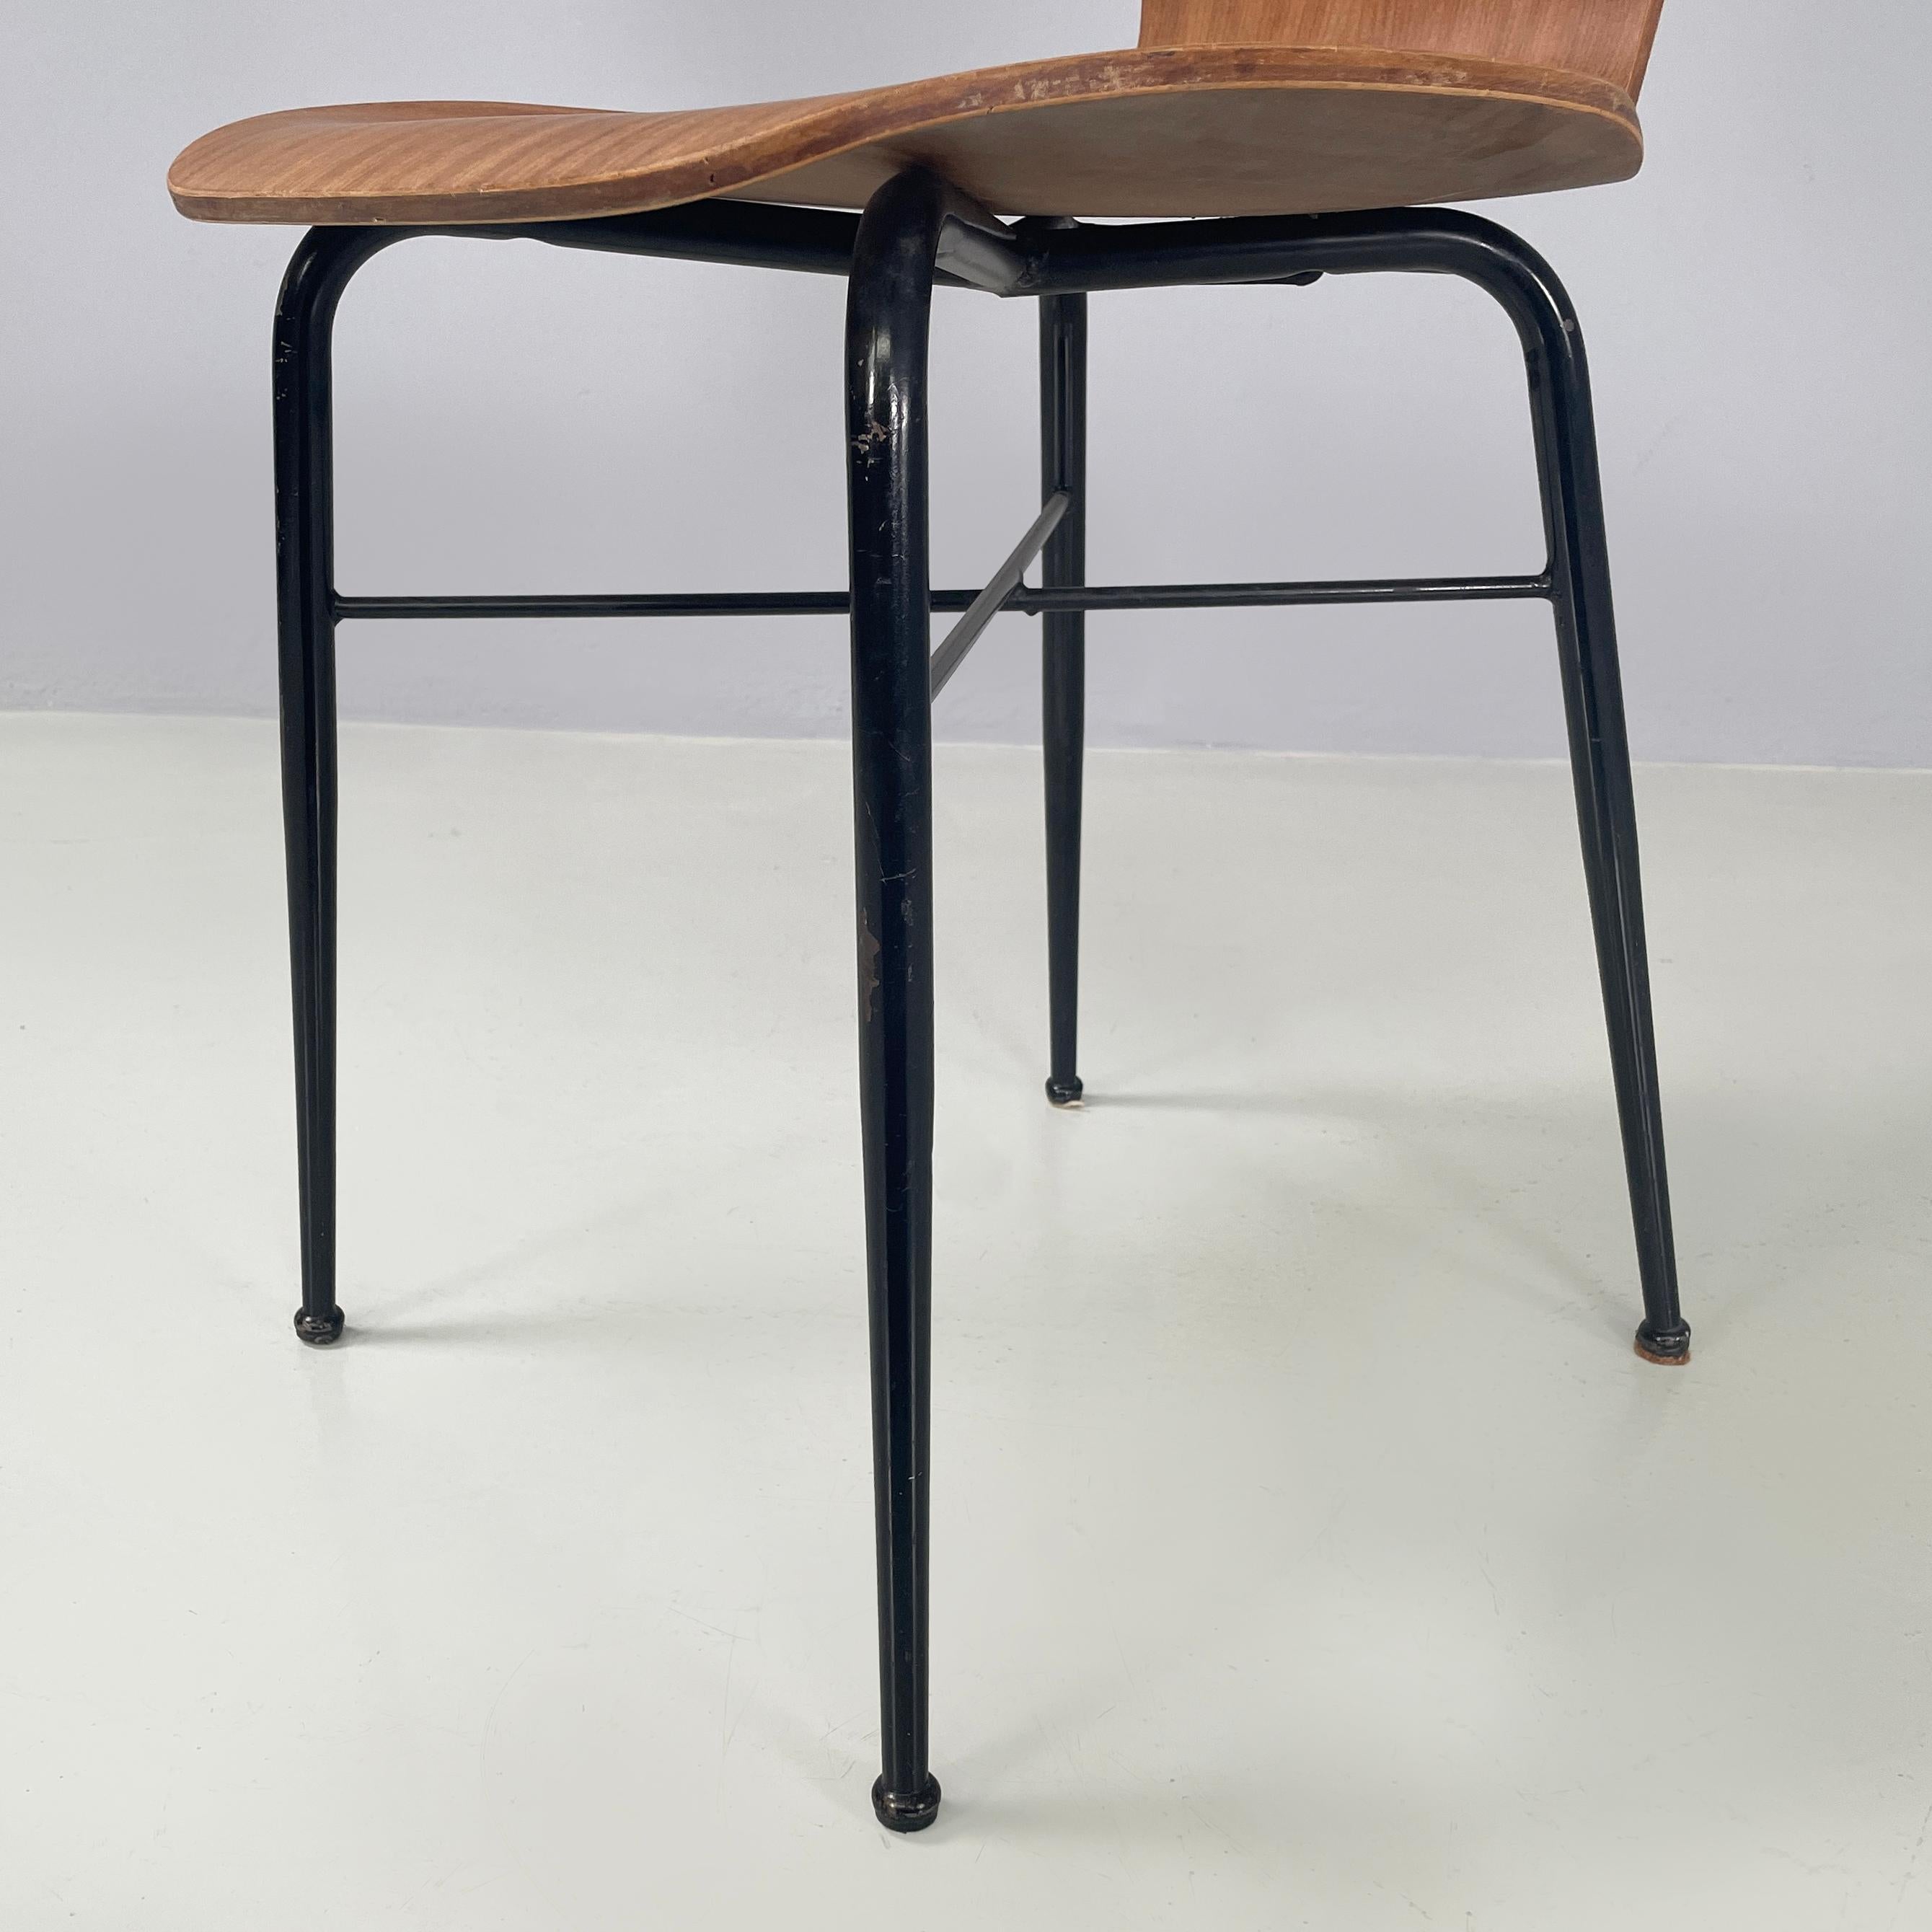 Italian mid-century modern Chair in curved wood and black metal, 1960s For Sale 9